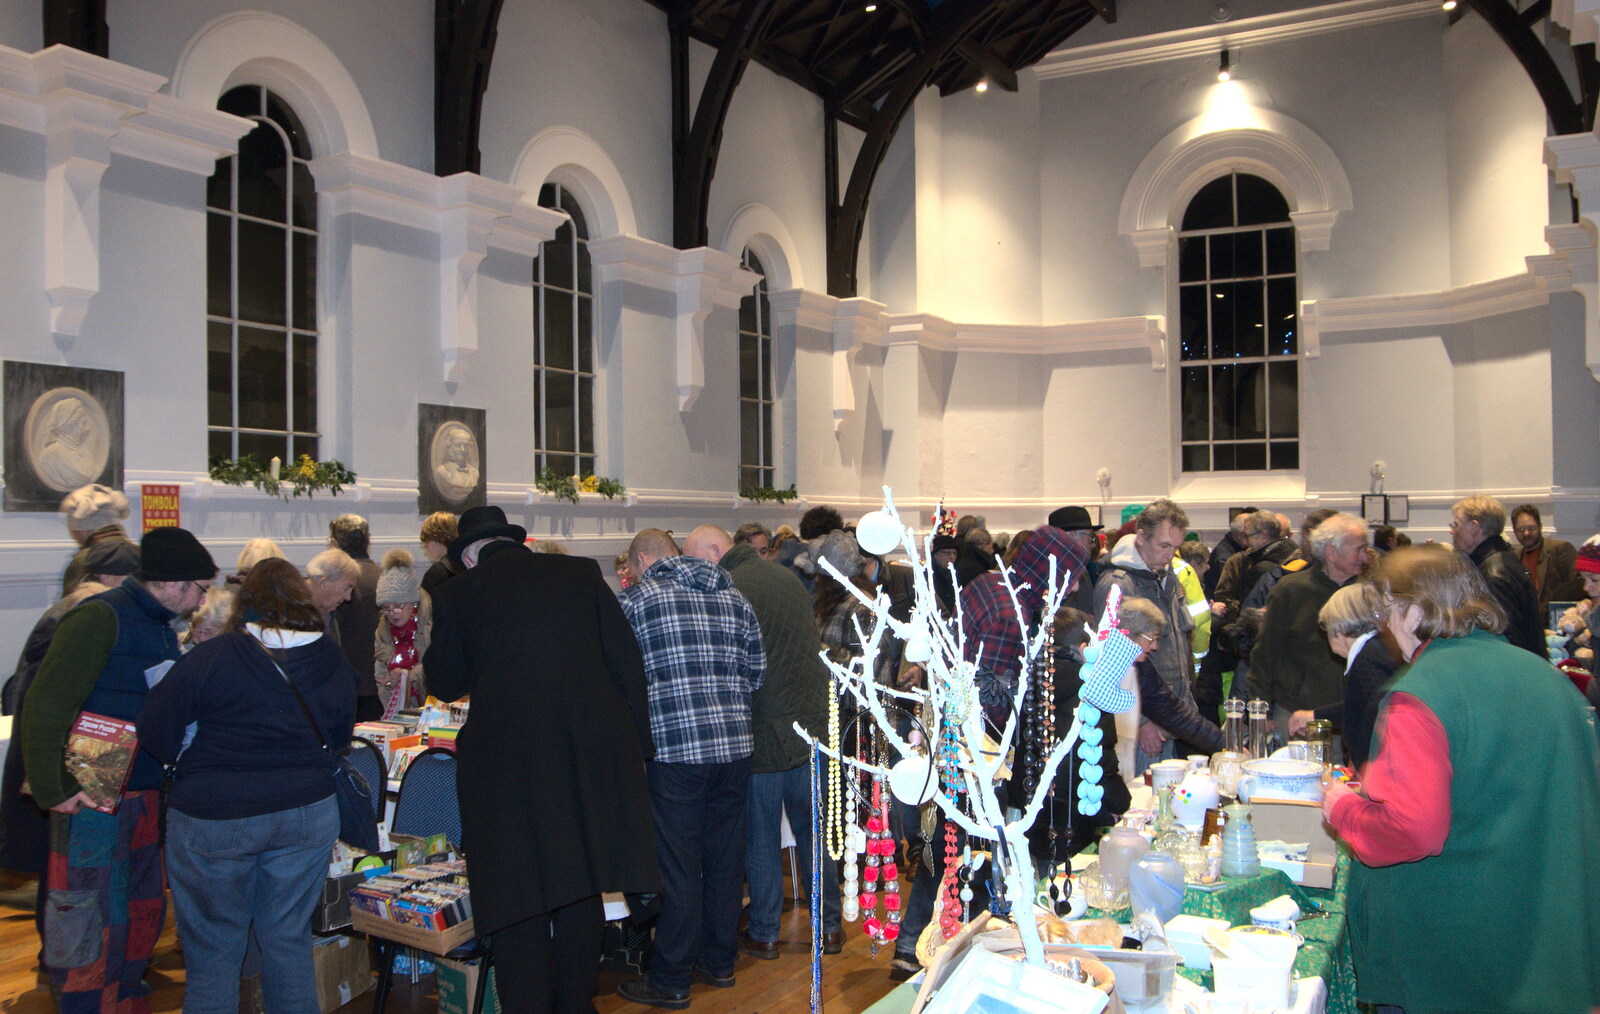 There's a craft market in the town hall from A Pub Crawl and Christmas Lights, Thornham, Cotton, Bacton and Eye, Suffolk - 7th December 2018